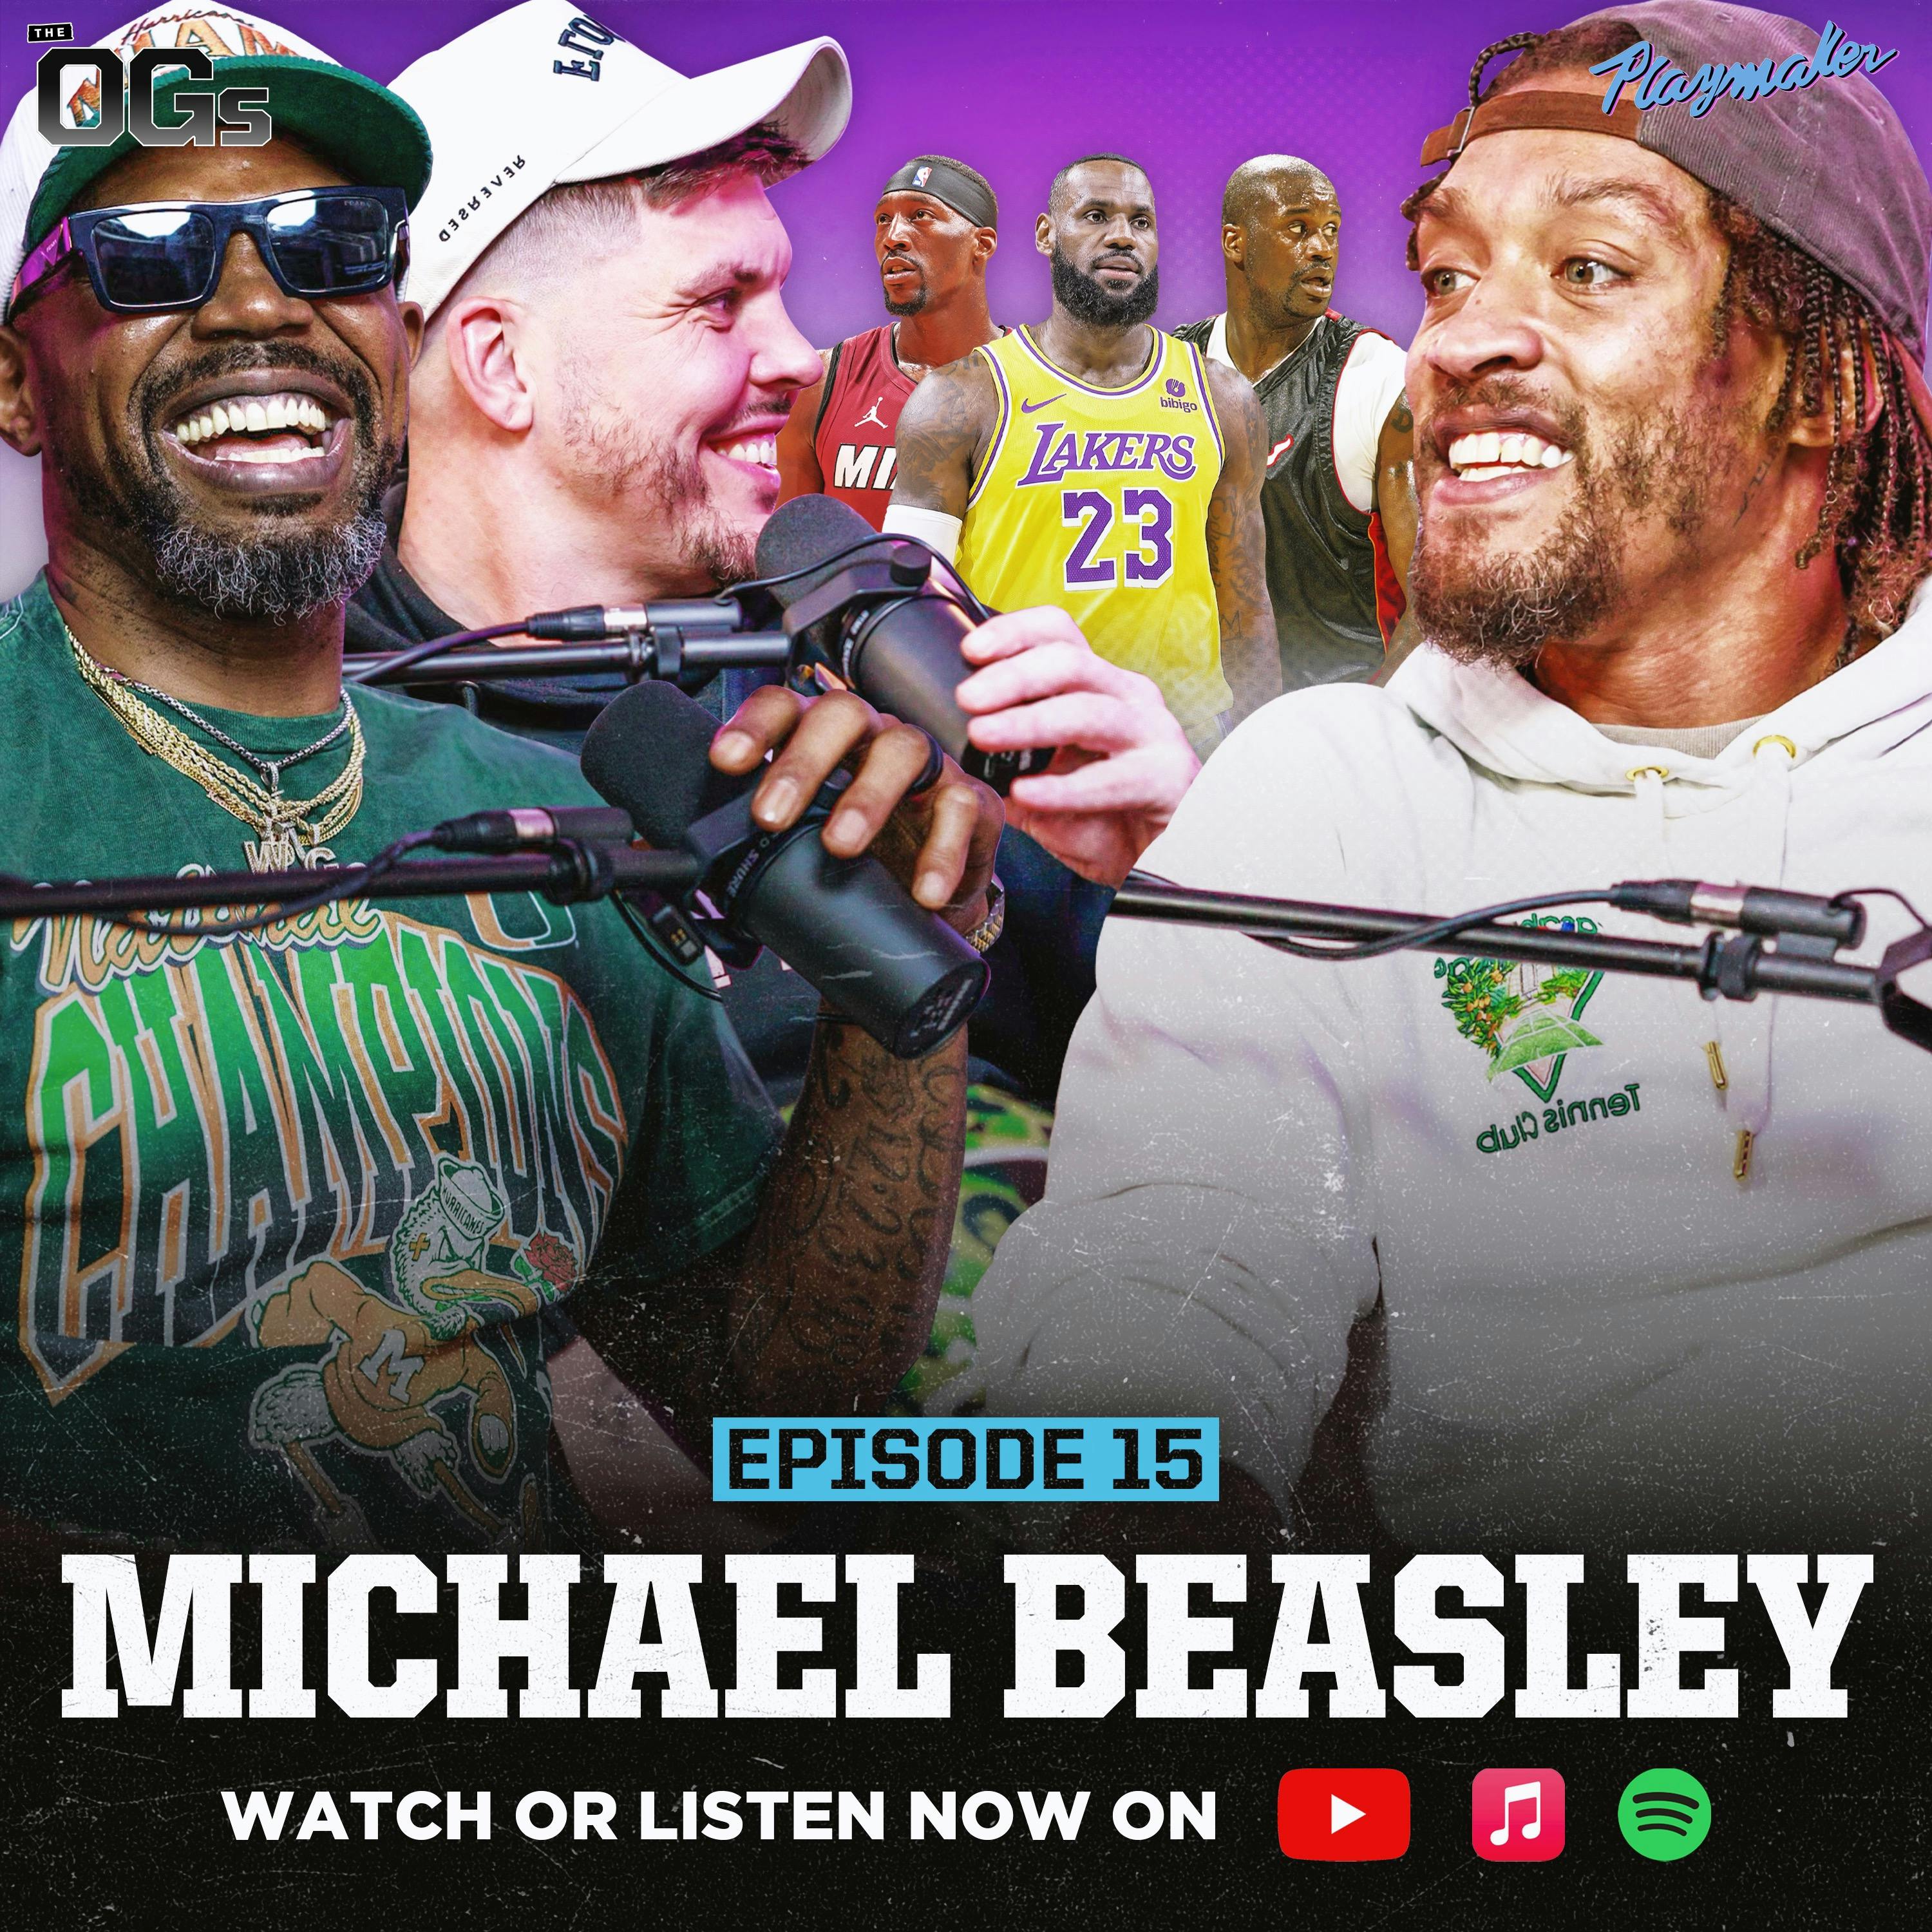 Michael Beasley Opens Up About Heat Struggles, Beating LeBron 1v1 & Untold NBA Stories